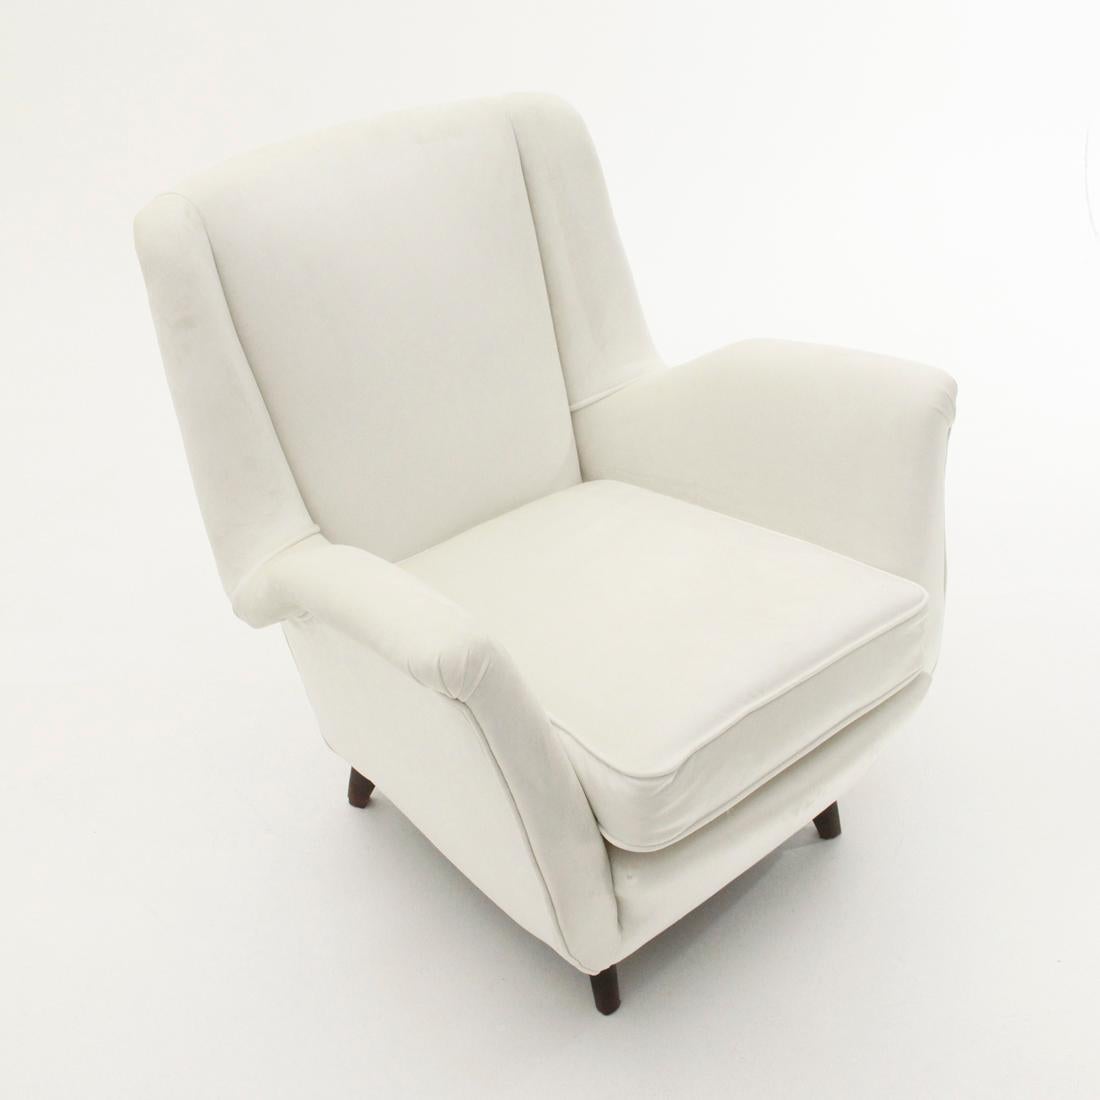 Italian-made armchair executed in the 1950s.
Padded wooden structure lined with new white velvet fabric.
Inclined conical wooden legs.
Good general condition, some signs due to the normal use of time in the wooden part.

Dimensions:
Length 83